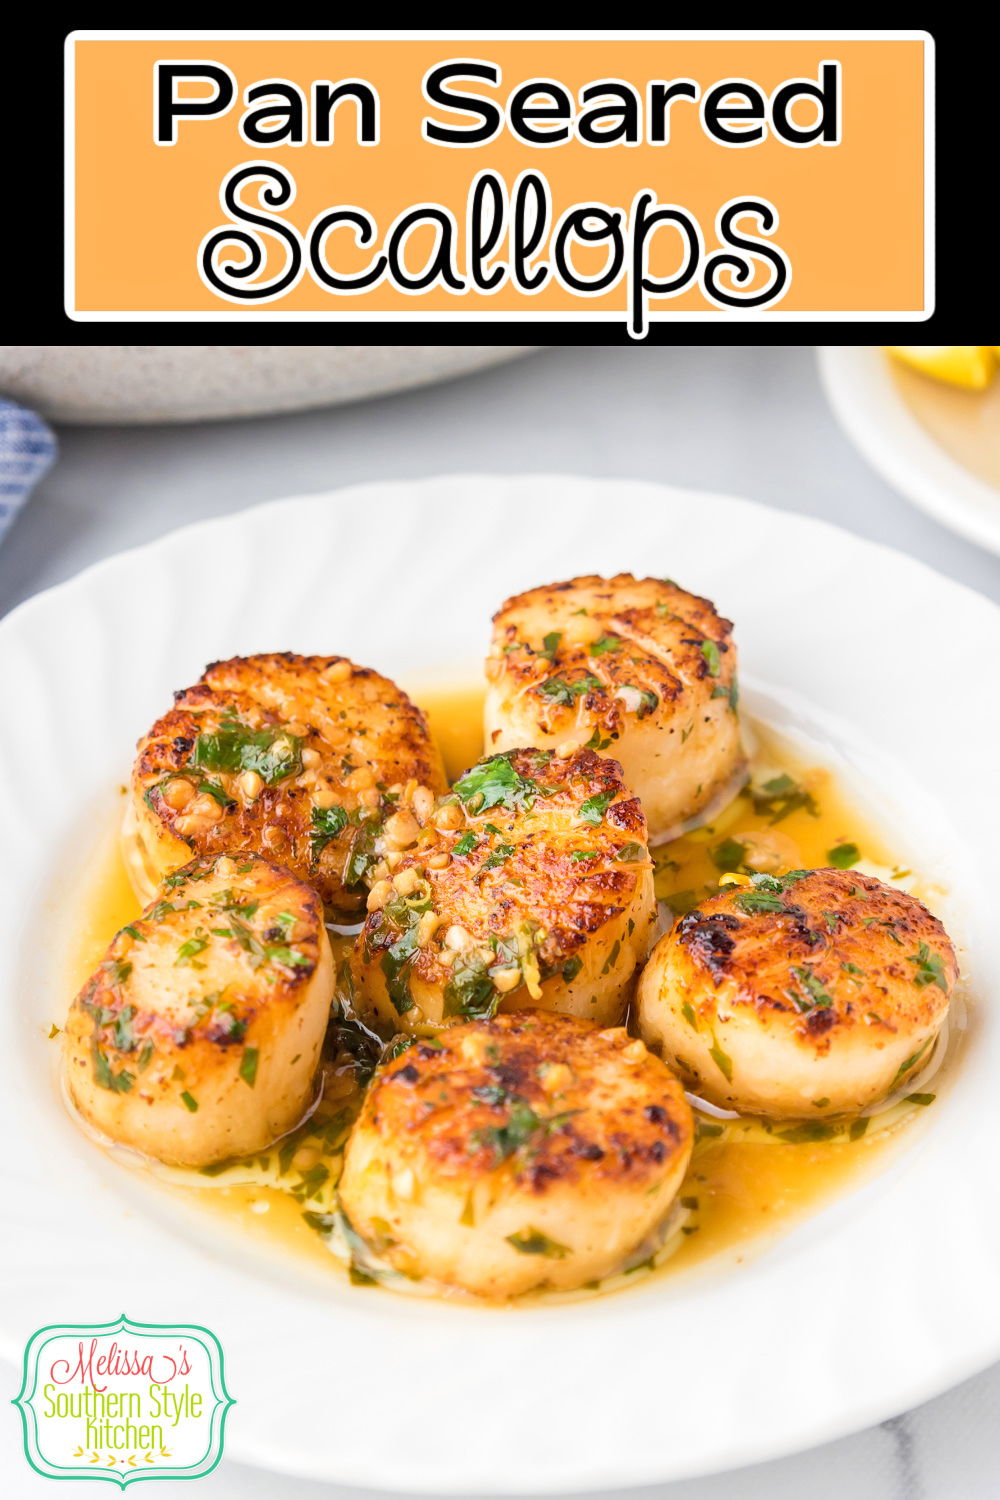 These crusted Seared Scallops are basted with a fresh lemon garlic butter pan sauce for an easy and impressive seafood dish. #scallops #searedscallops #seafoodrecipes #lemonbutter #scallopswithlemon #cookedscallops pansearedscallops via @melissasssk